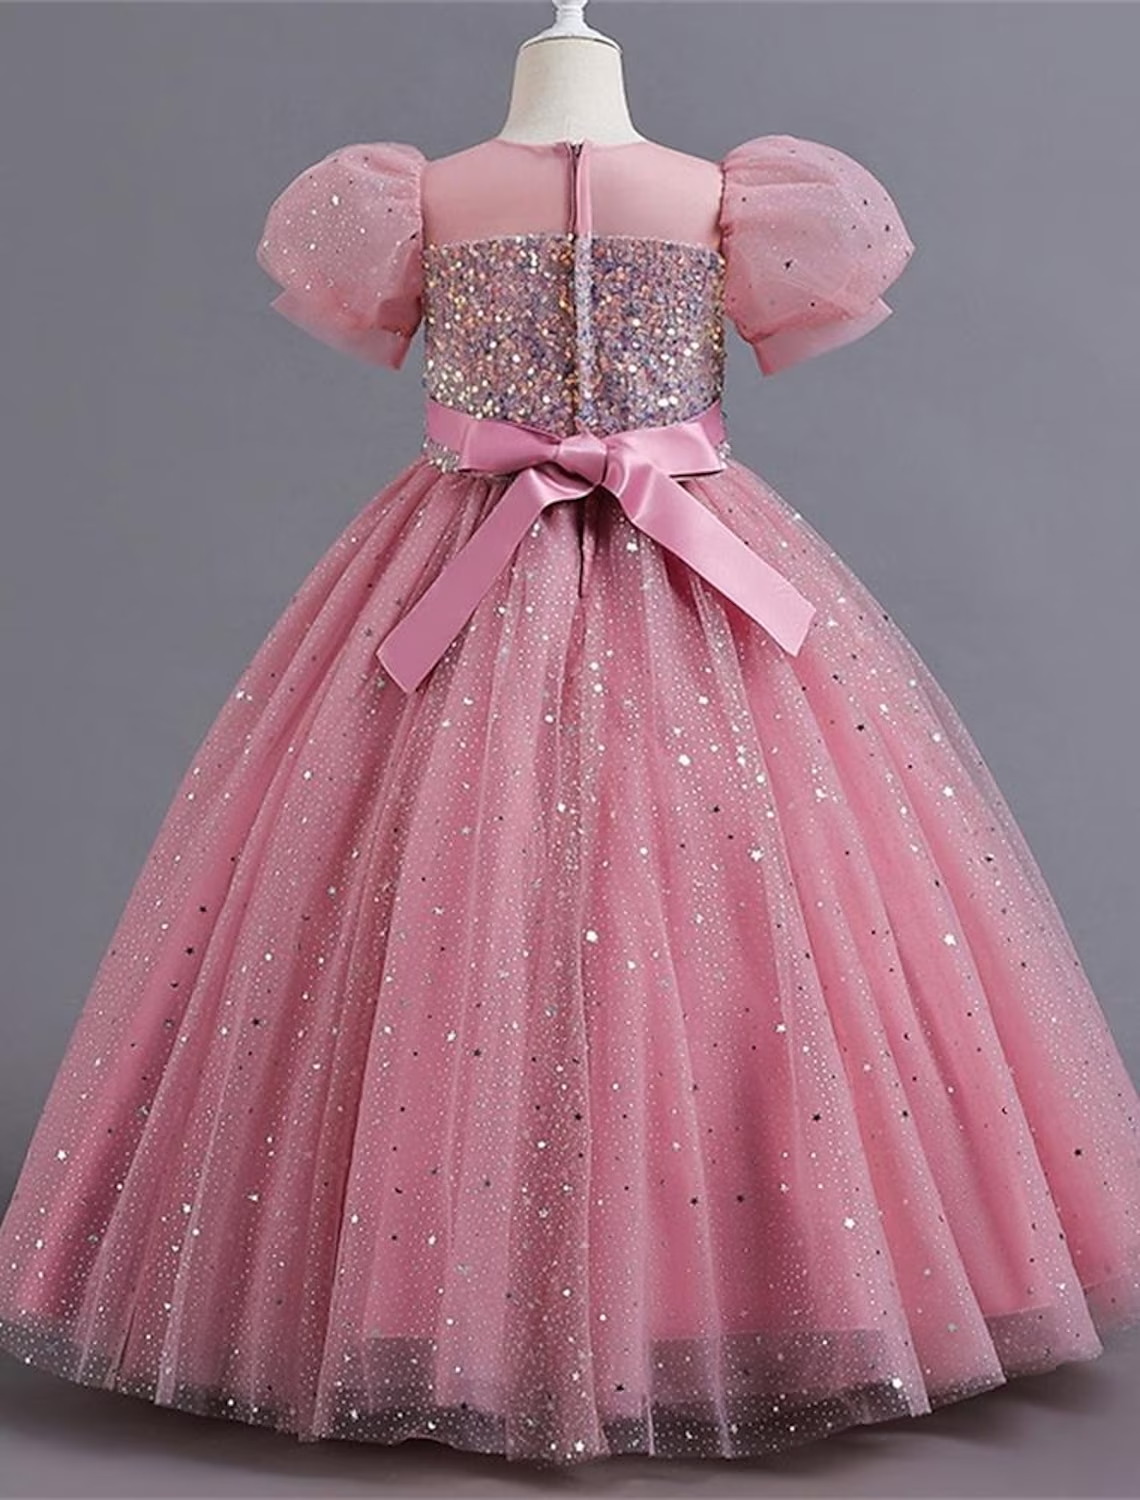 0-4 years baby girls pageant sequin| Alibaba.com